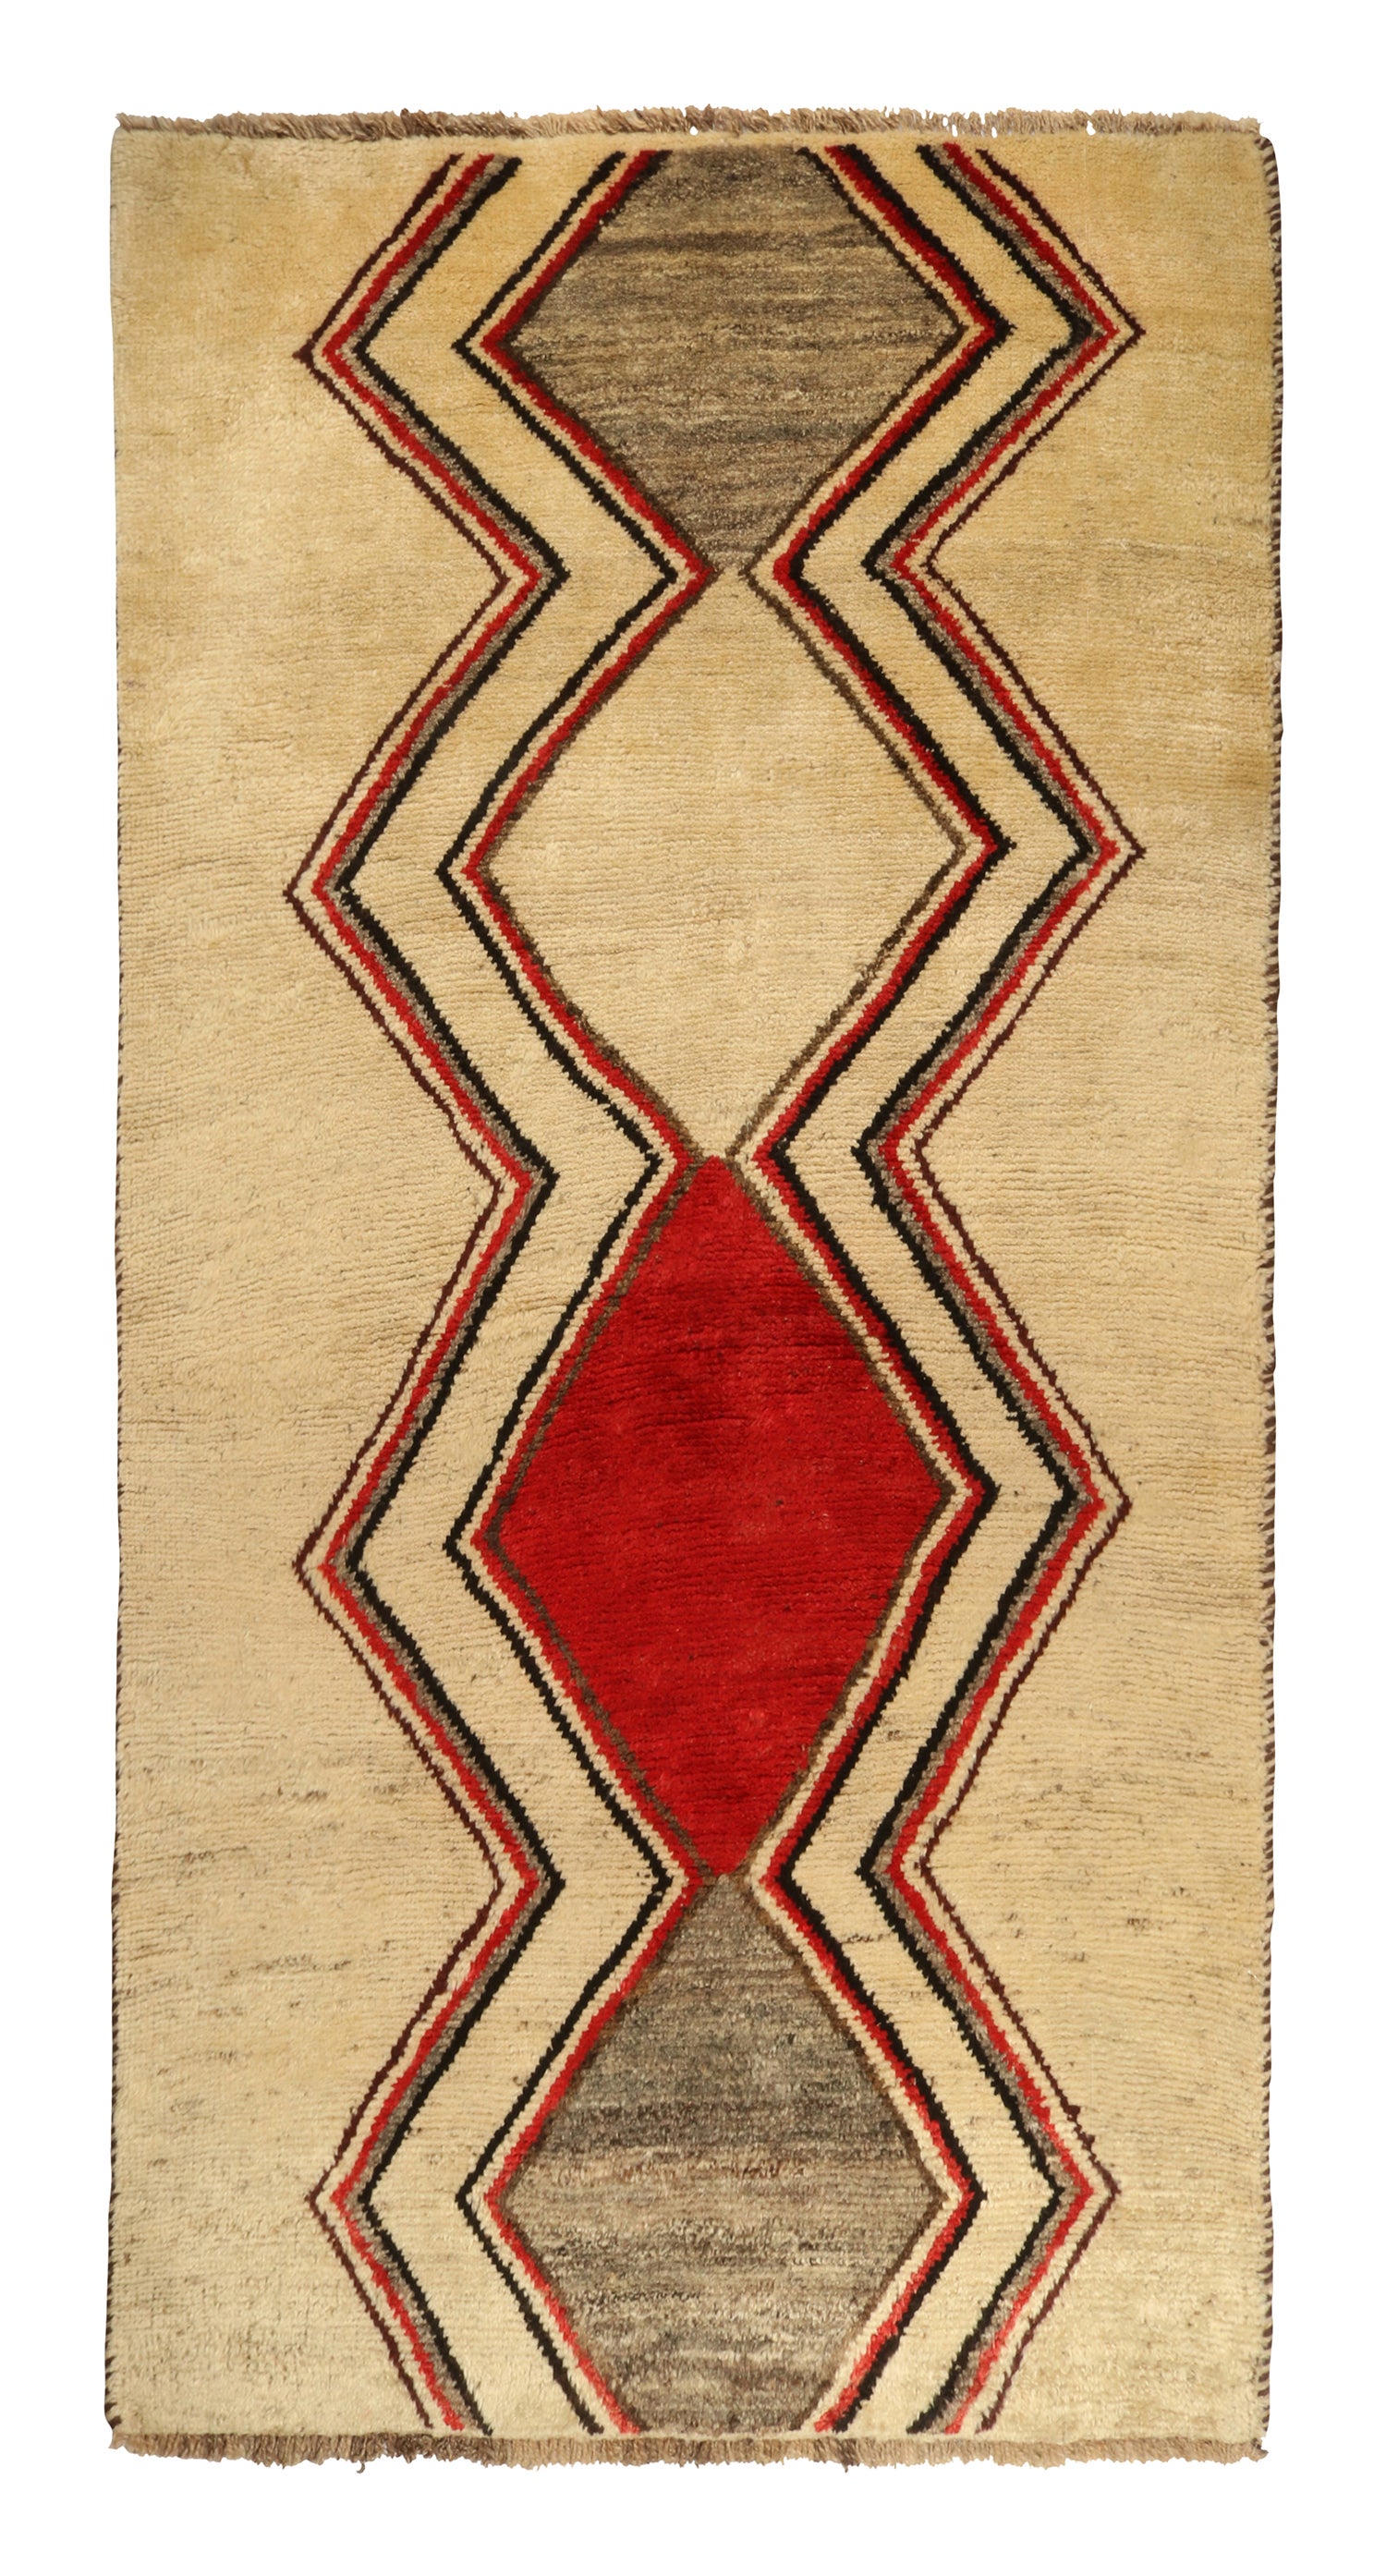 Vintage Gabbeh runner in Beige with Grey & Red Chevron Pattern by Rug & Kilim For Sale